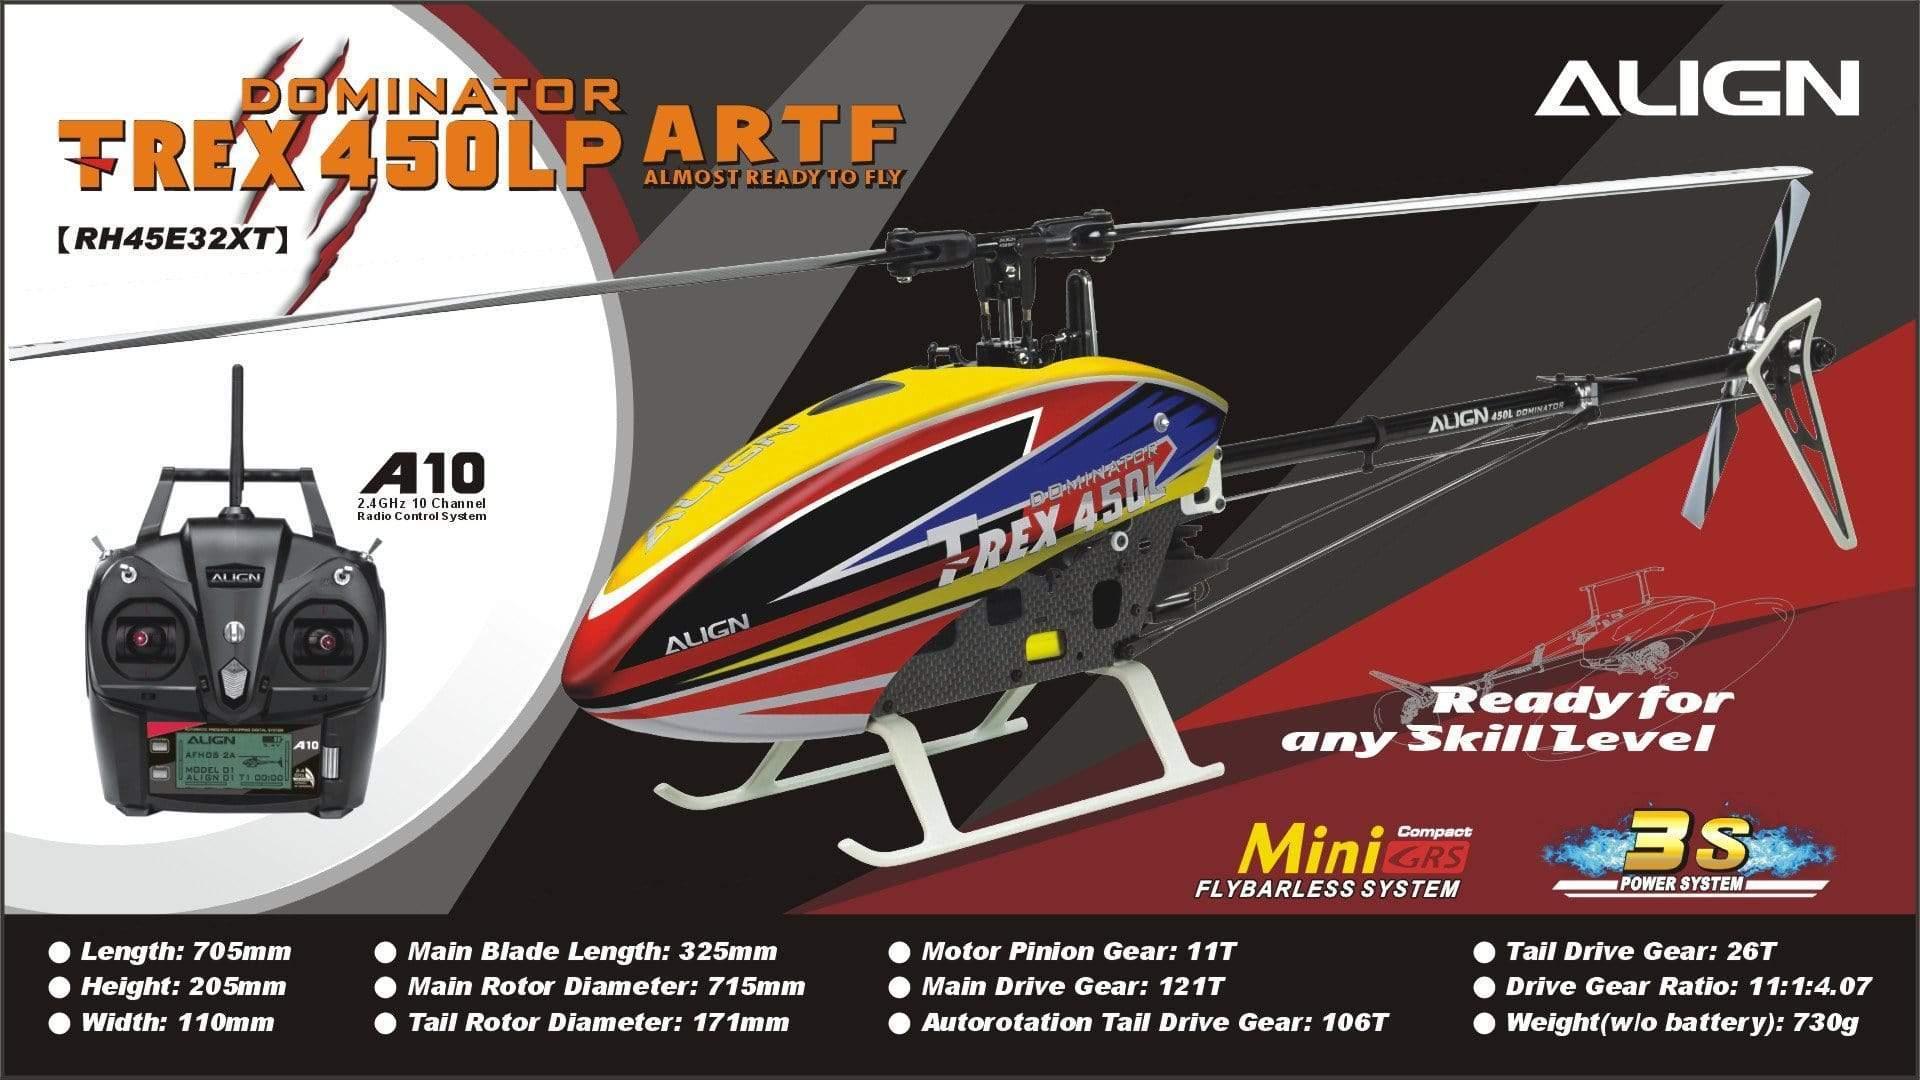 Rc Helicopter Align Trex 450: Powerful and Precise: The Align T-Rex 450 Helicopter